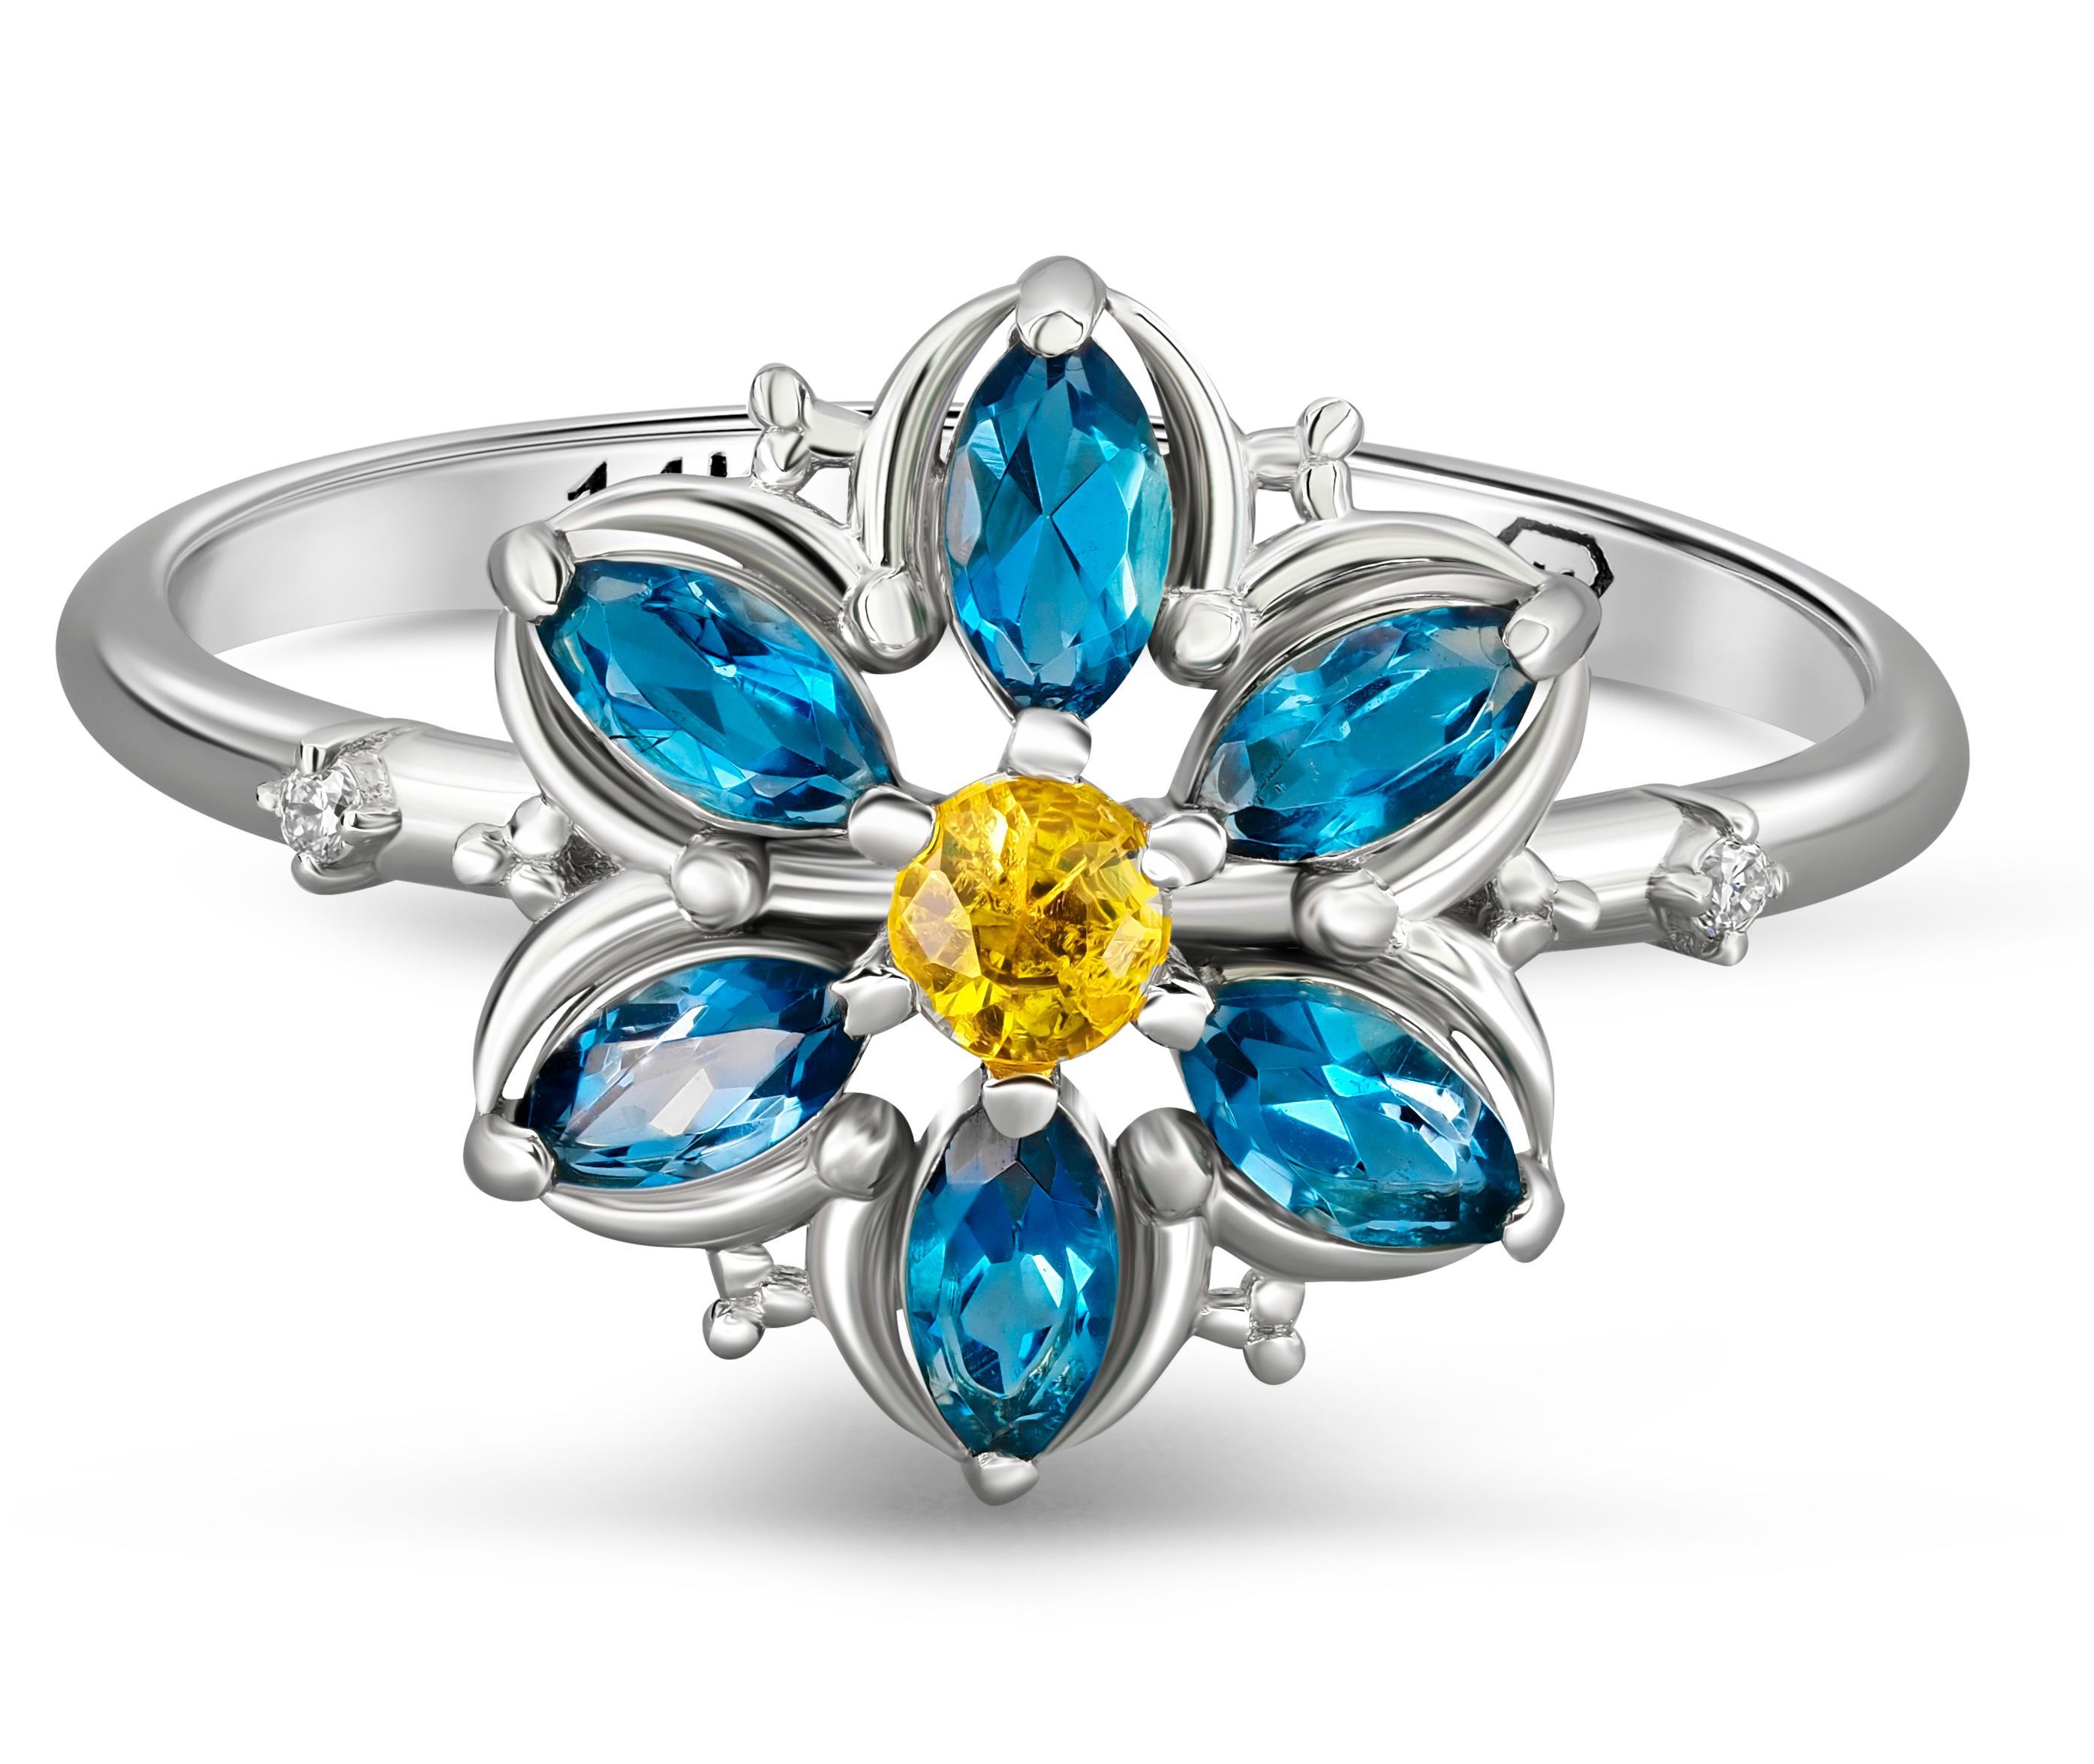 Forget Me Not gold ring with topaz. 
Marquise topaz ring. Sky blue topaz ring. Floral Band With topazes and sapphire. Alaska floral ring.

Weight: 1.8 g. depends from size
Metal - 14k gold.

Sapphire: cut - round, weight - 0.25, color : yellow,